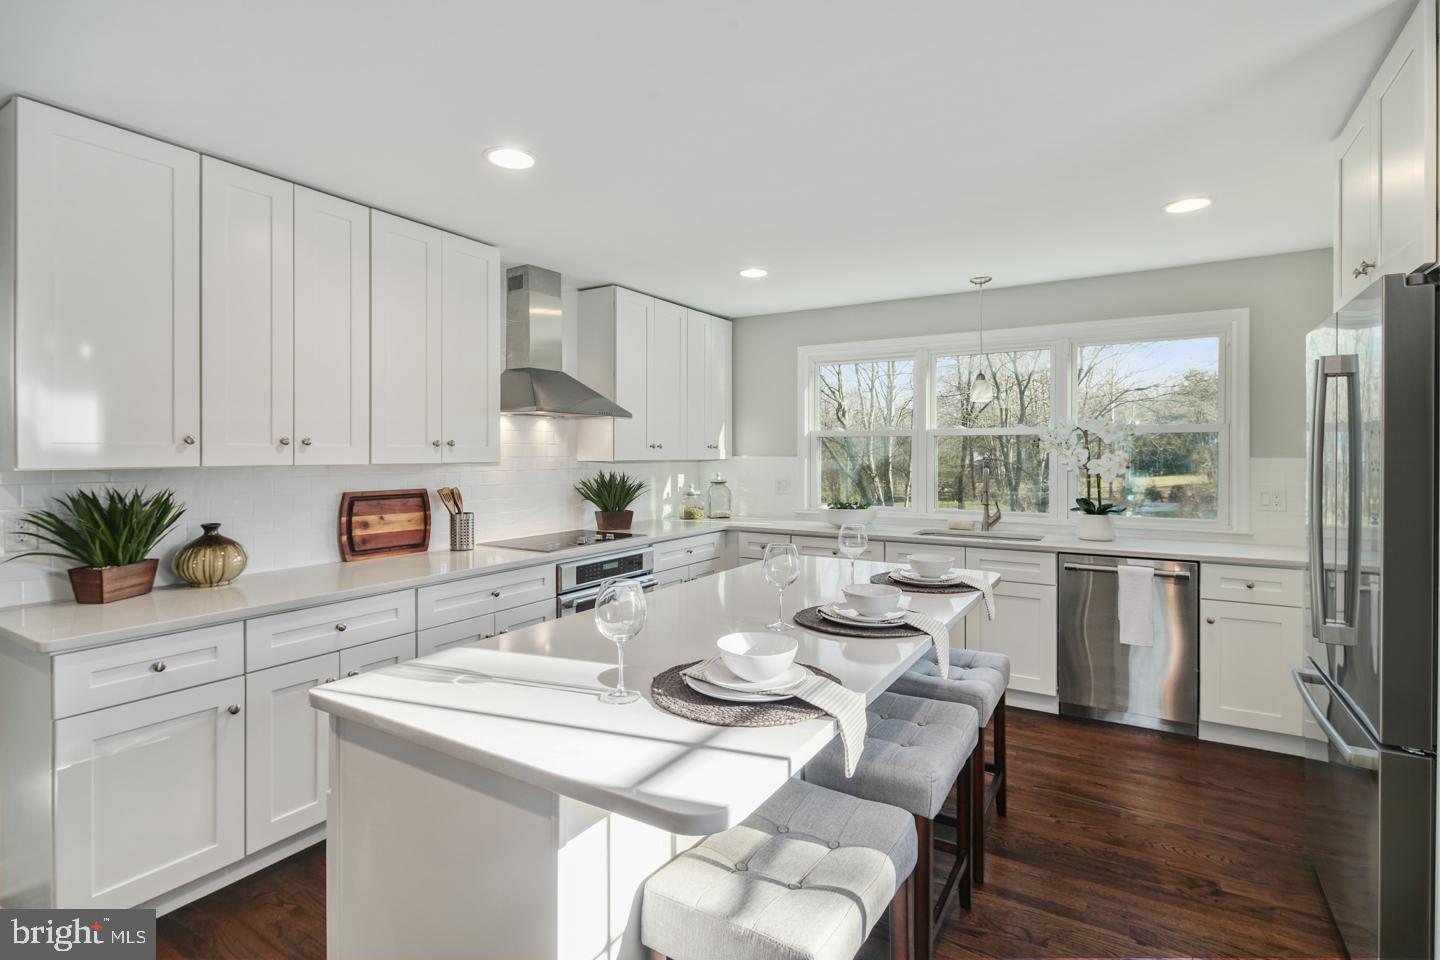 a open dining room with stainless steel appliances kitchen island granite countertop a refrigerator a stove a sink dishwasher and white cabinets with wooden floor